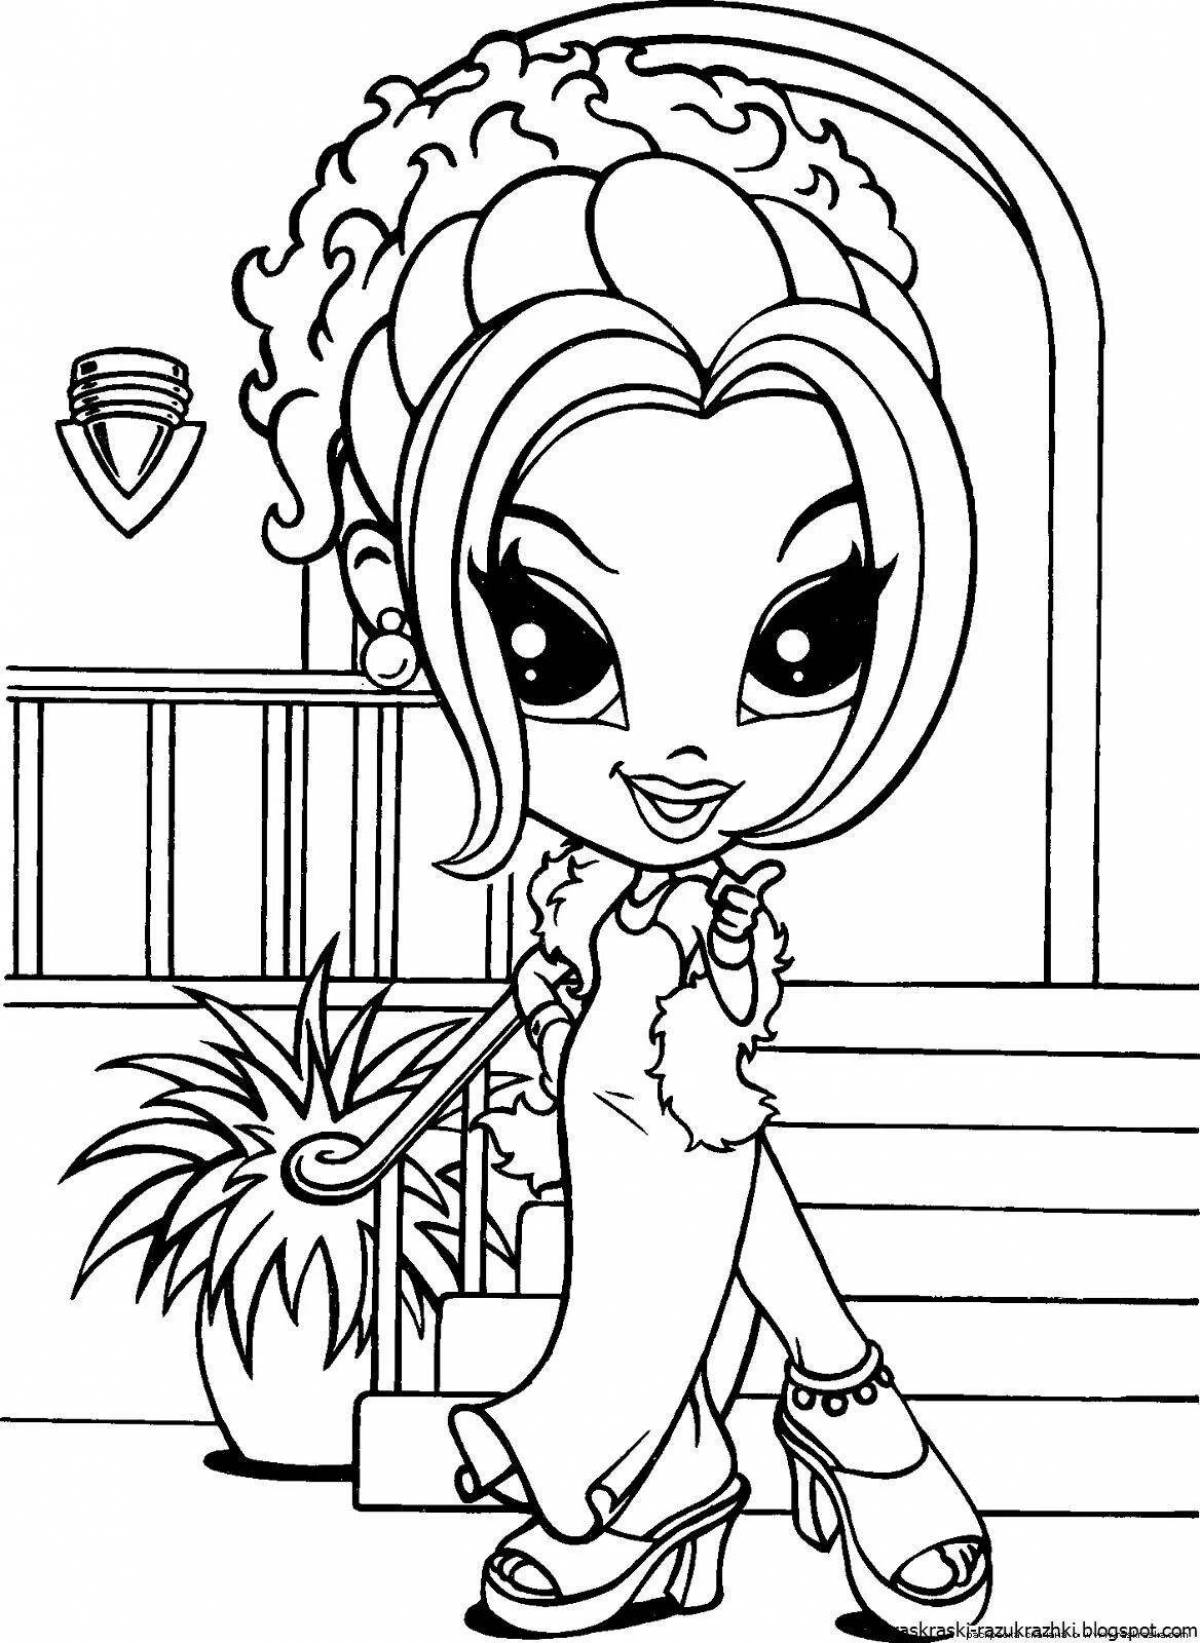 Elegant coloring book for girls 8-11 years old